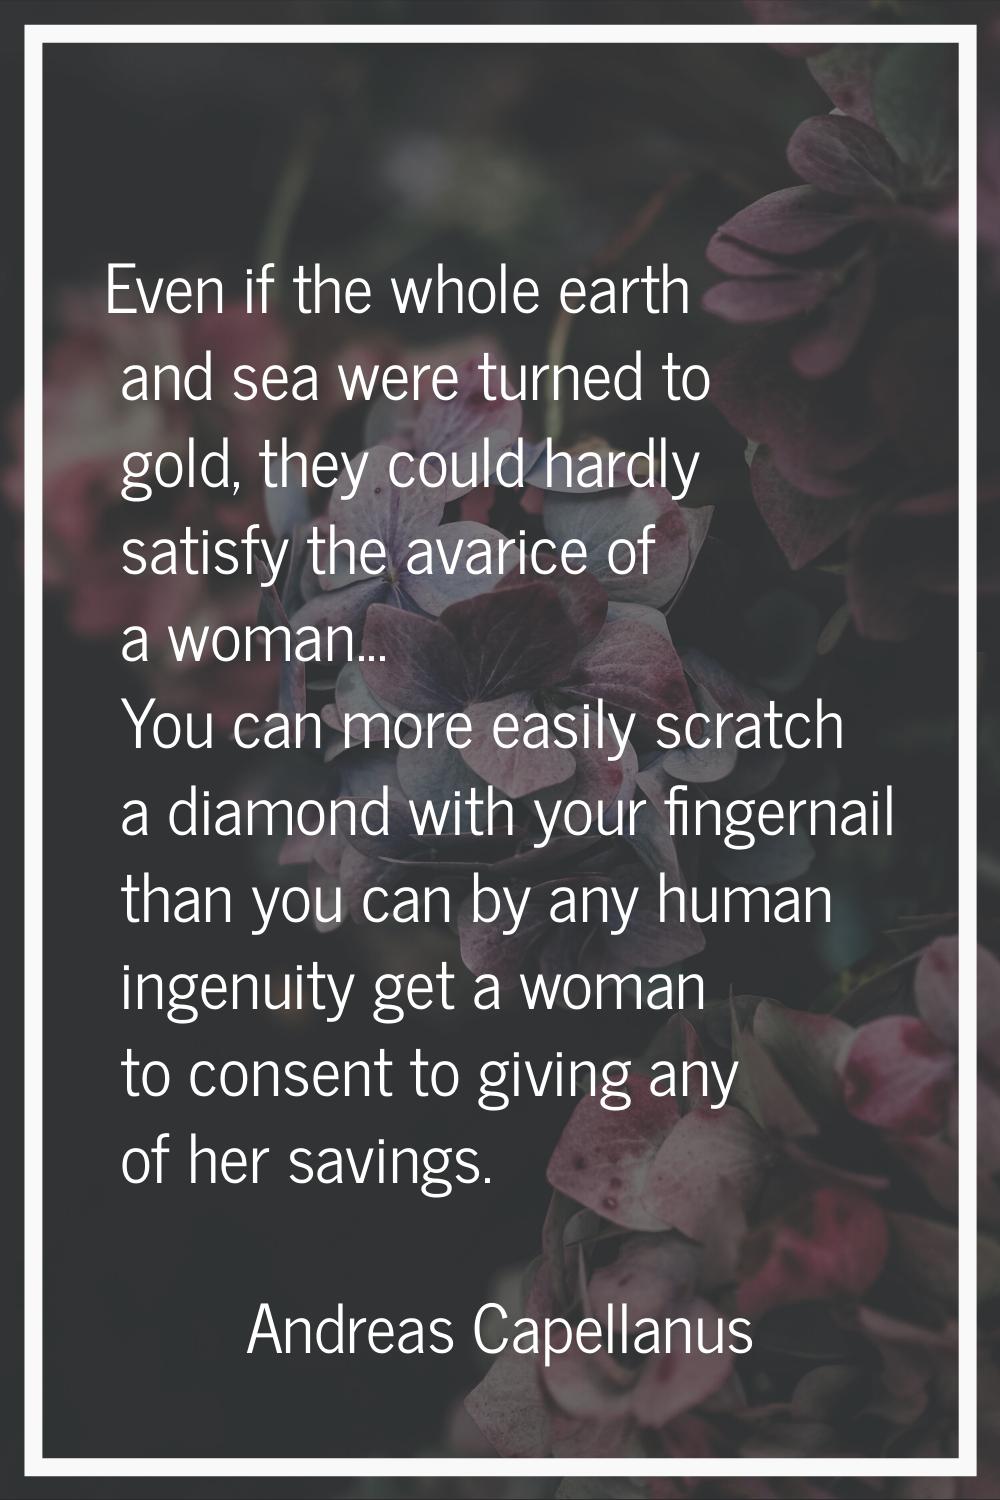 Even if the whole earth and sea were turned to gold, they could hardly satisfy the avarice of a wom